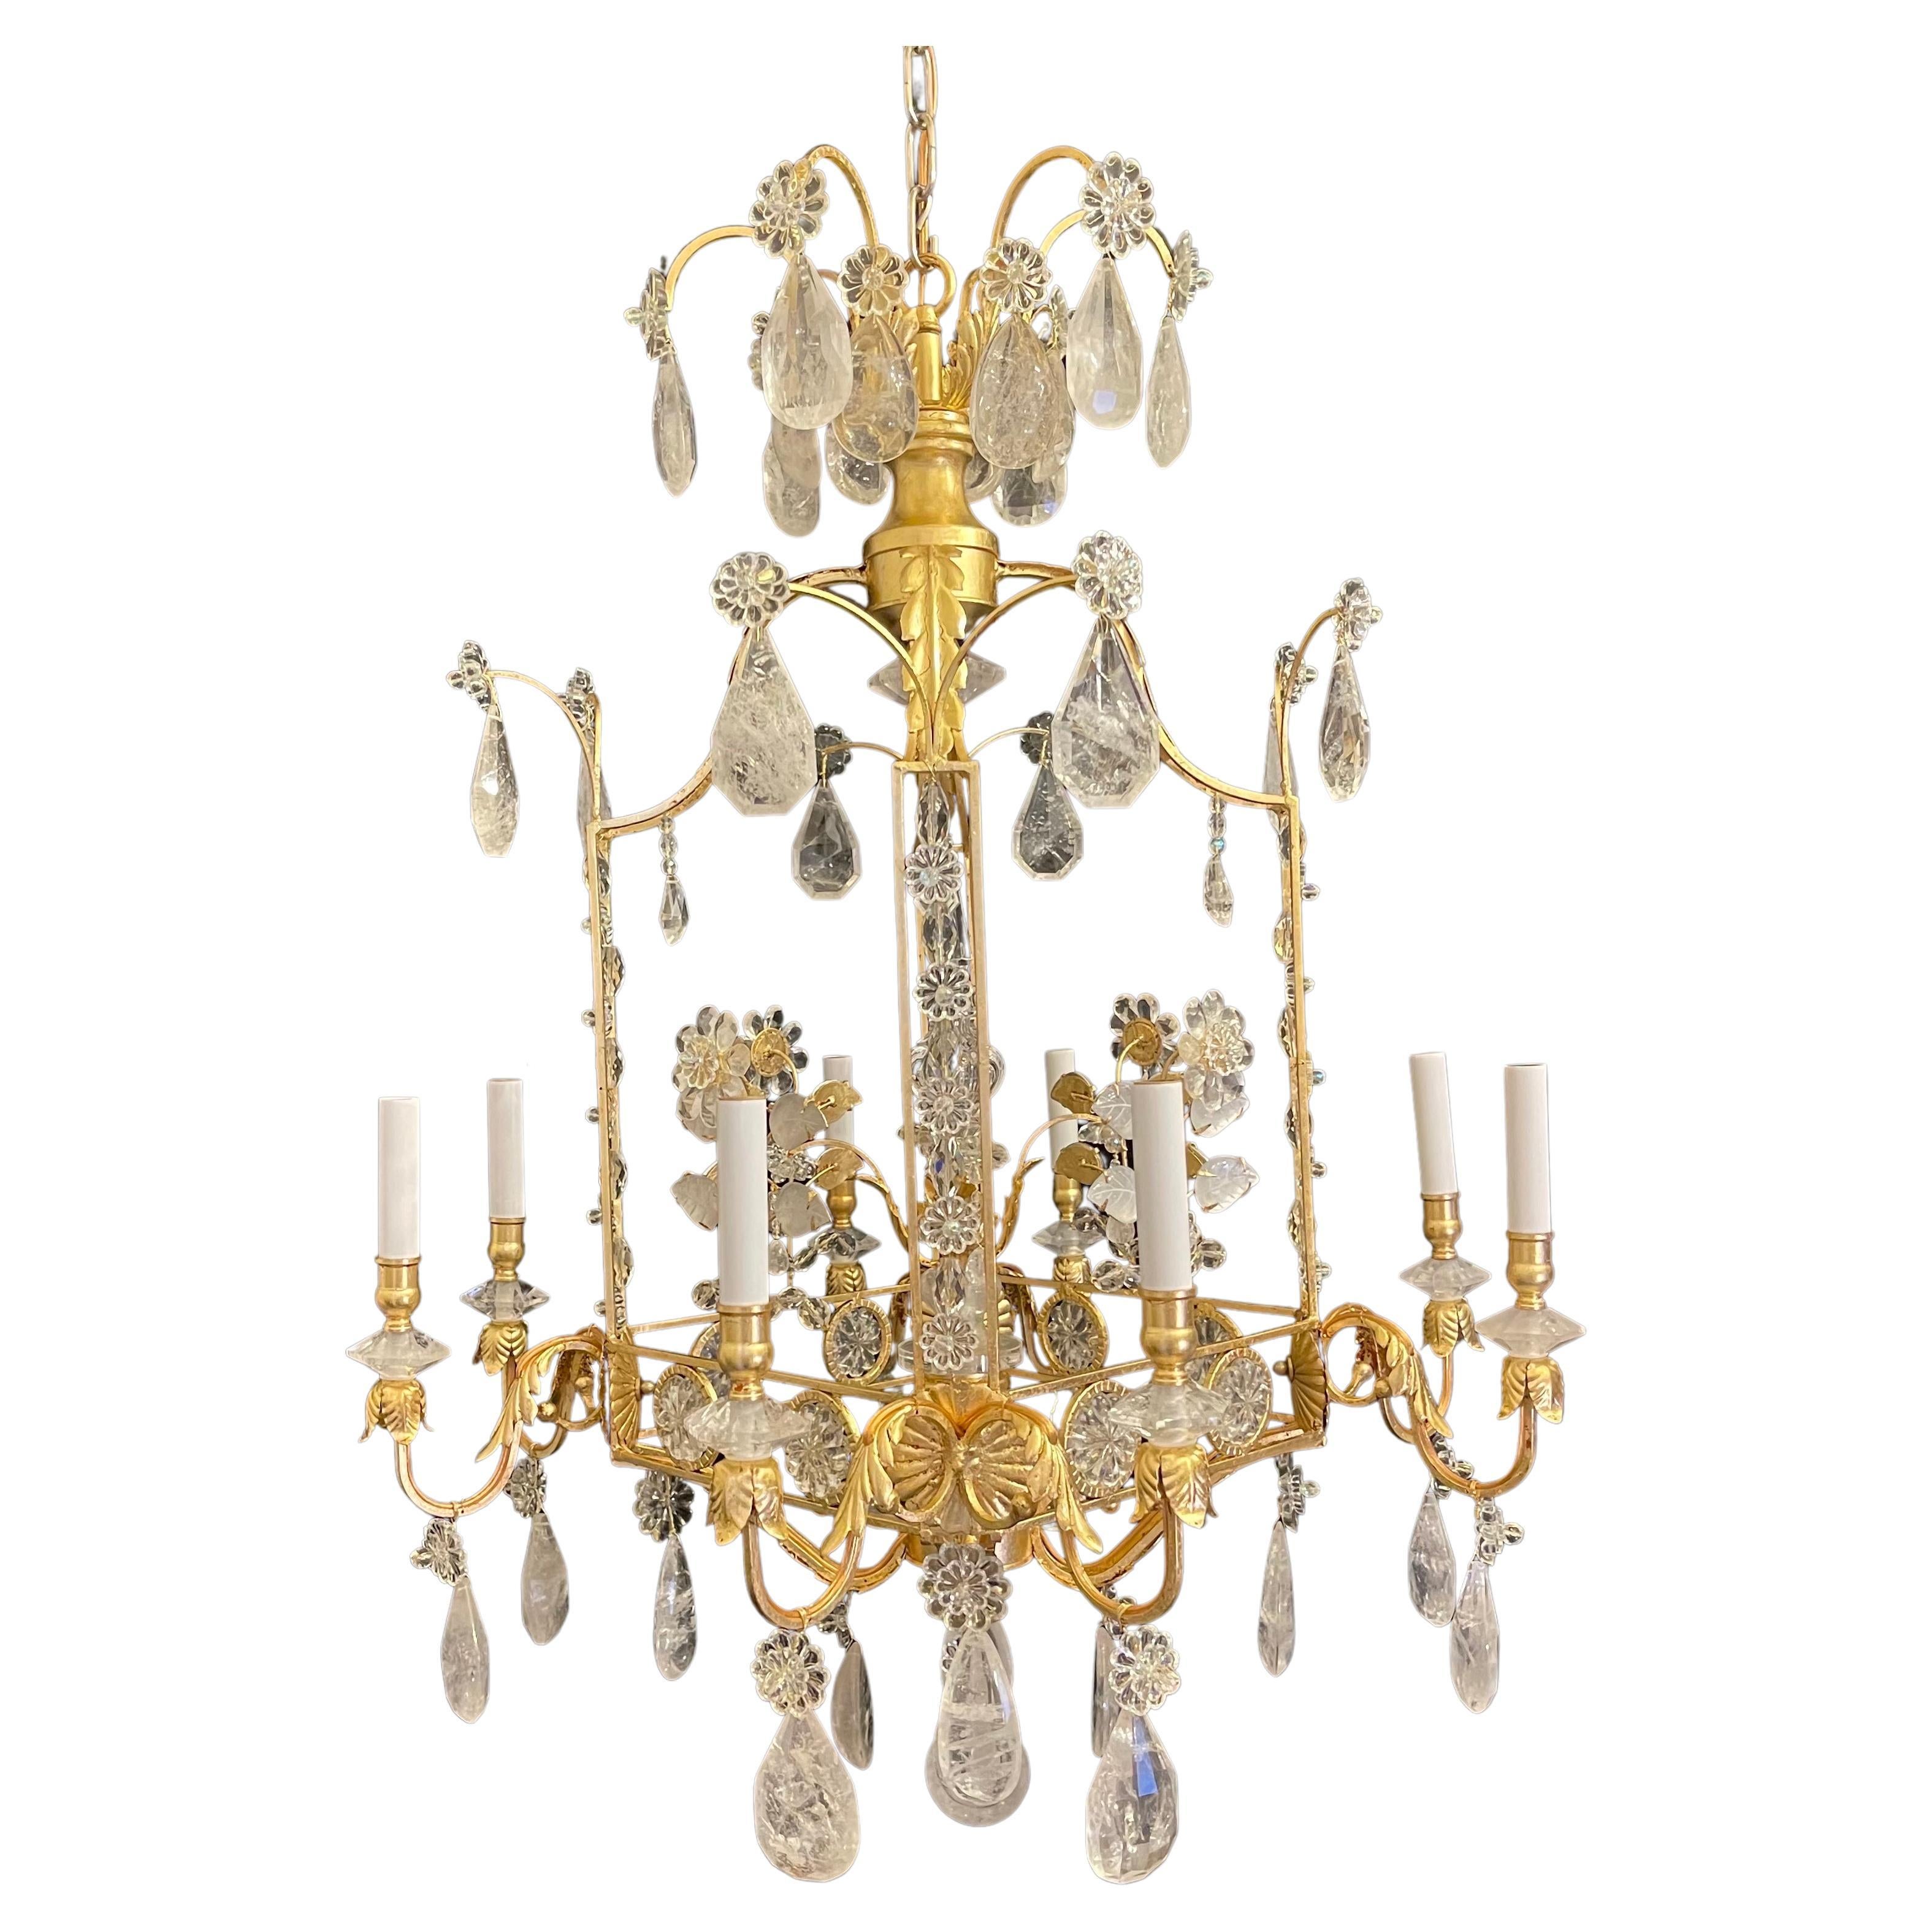 A Wonderful Maison Baguès / Louis XVI Style Large Pair Of Rock Crystal And Beaded Eight-Light Gold Gilt Square Bird Cage Form Chandeliers
Rewired And Accompanied By Chain And Canopy

*Each Sold Individually